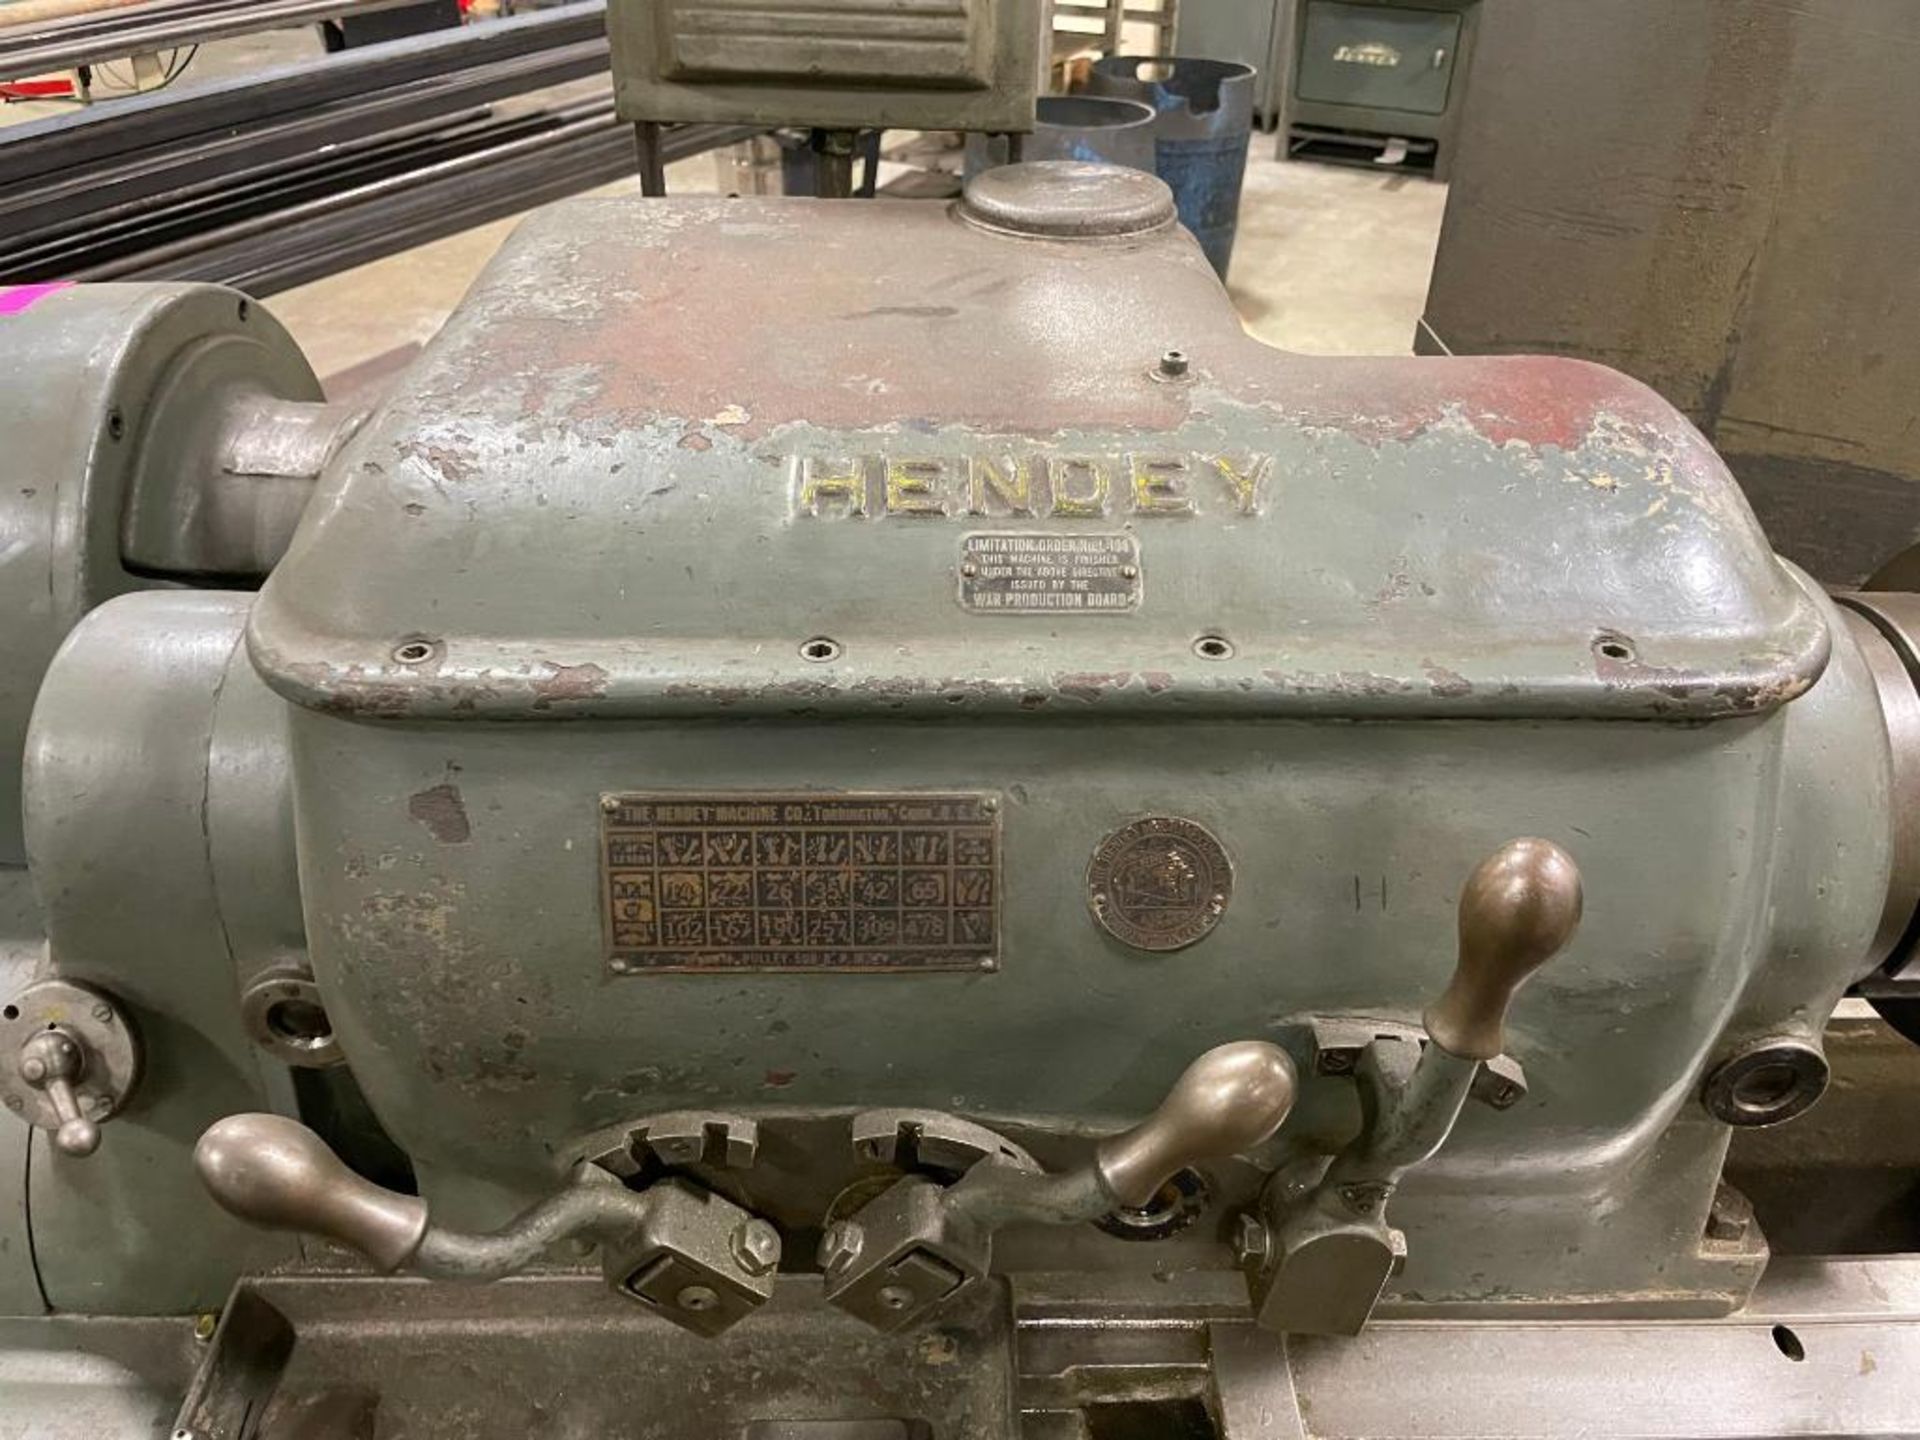 HENDEY METAL LATHE SIZE: 16X30 LOCATION: WAREHOUSE QTY: 1 - Image 4 of 14